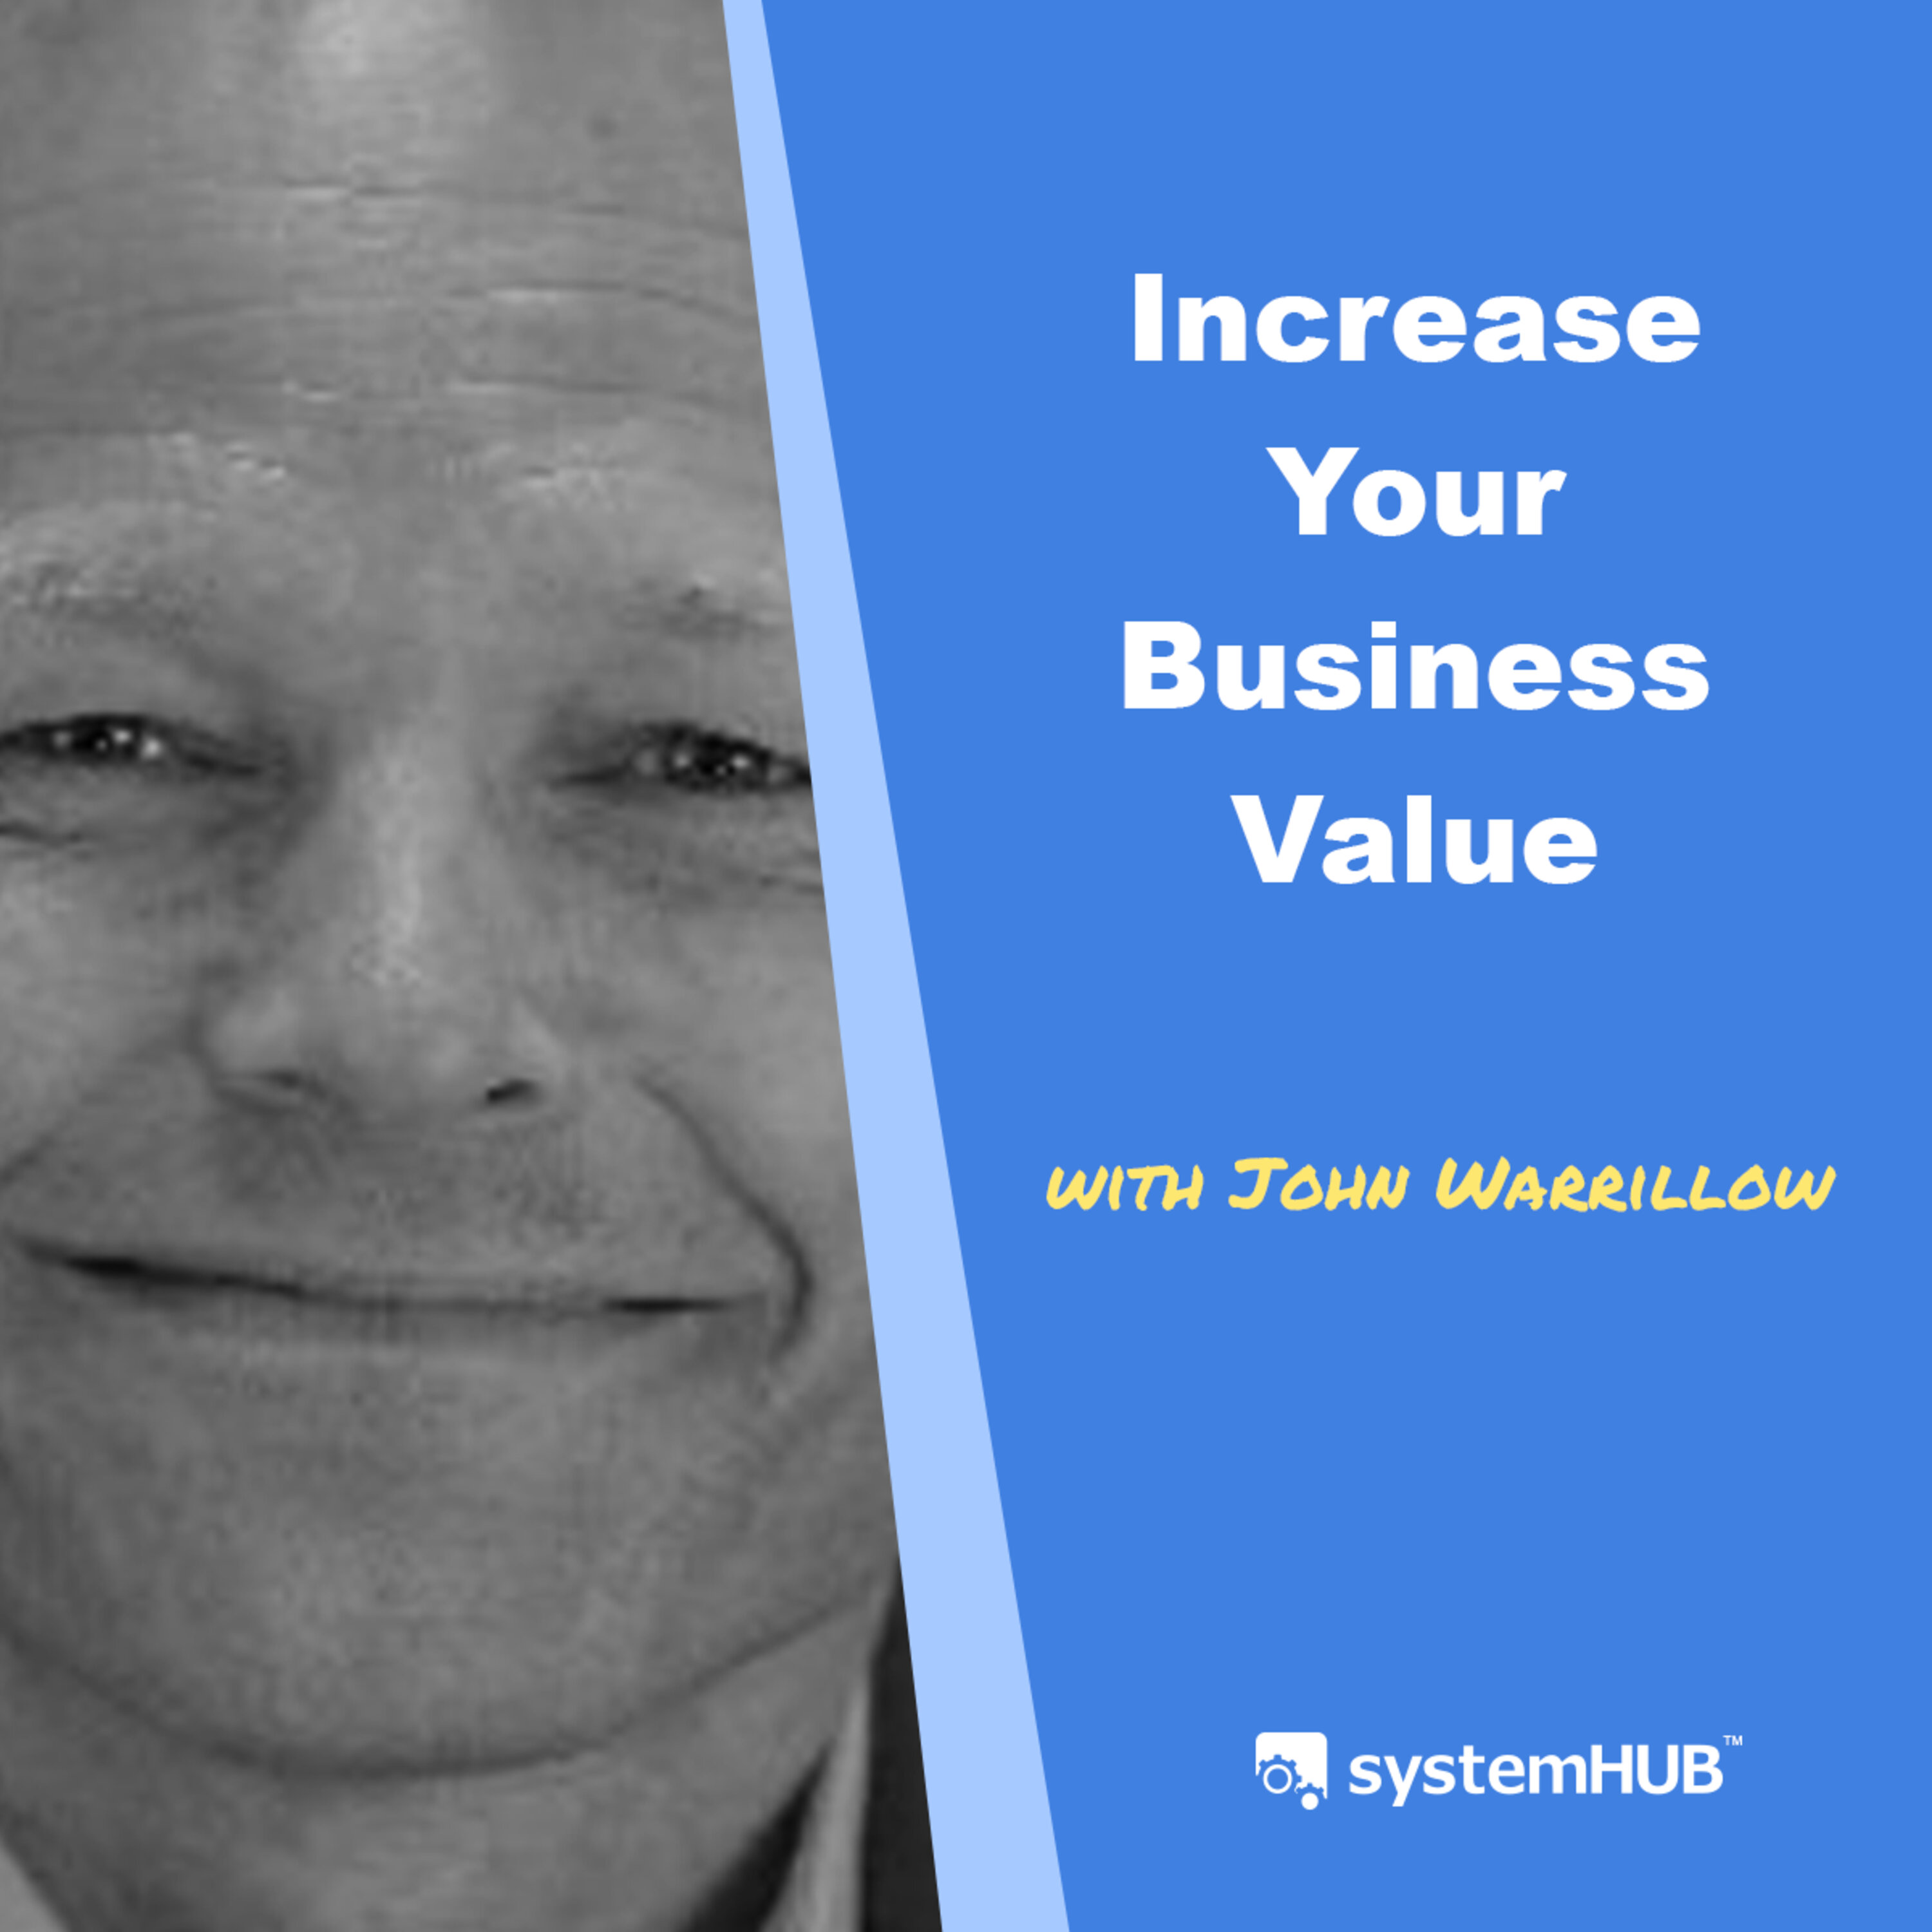 The Value Builder System™ with John Warrillow